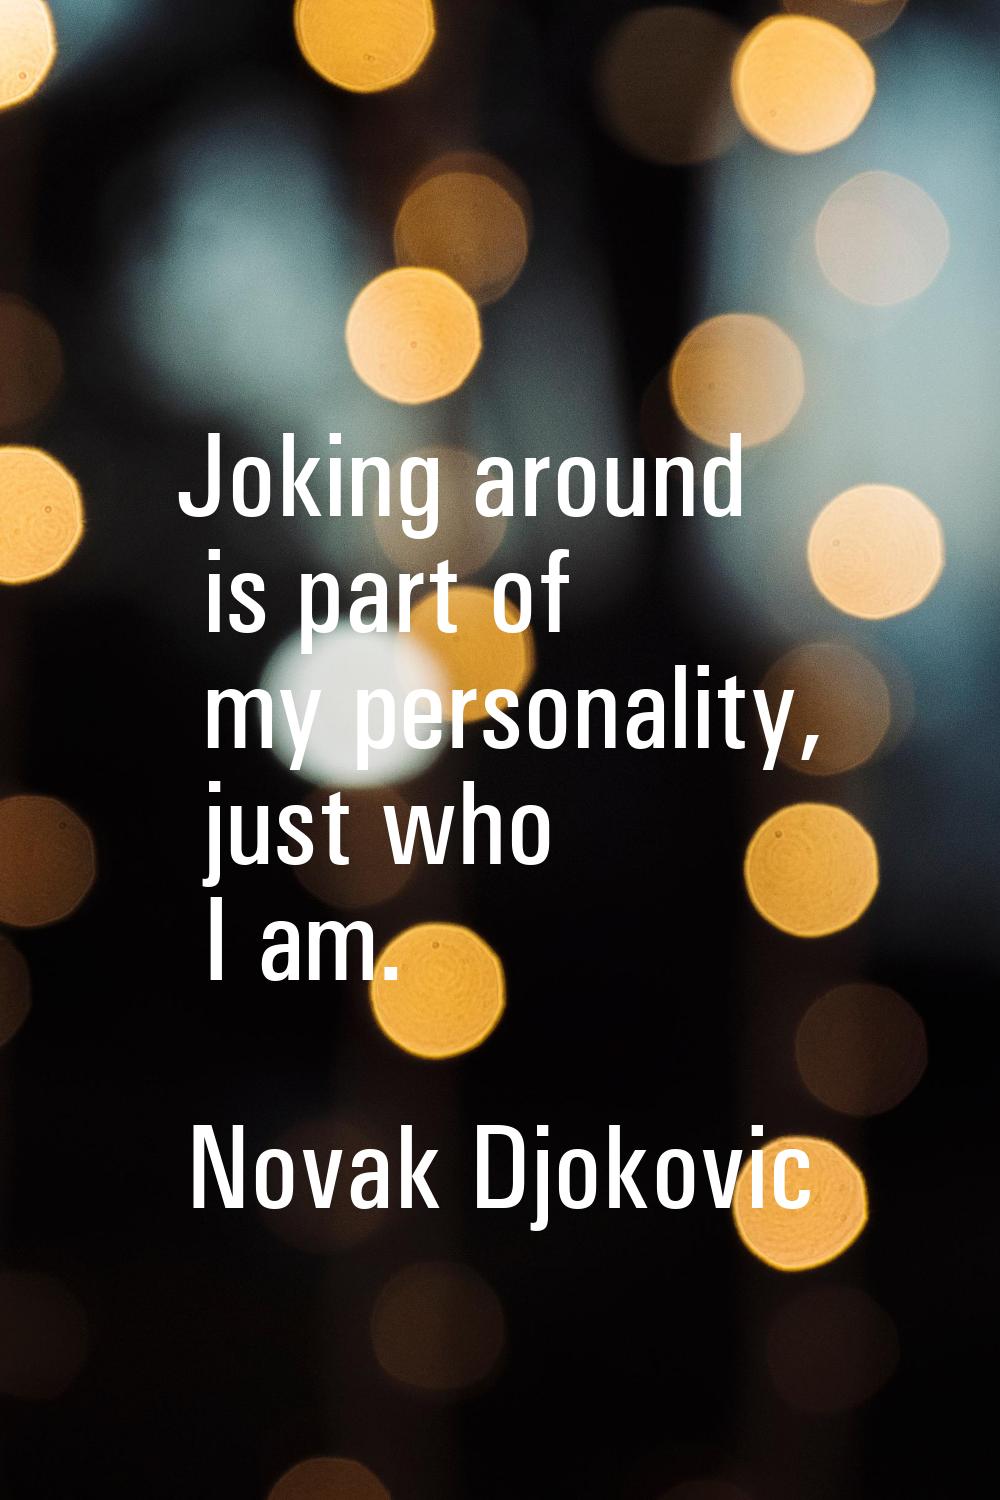 Joking around is part of my personality, just who I am.